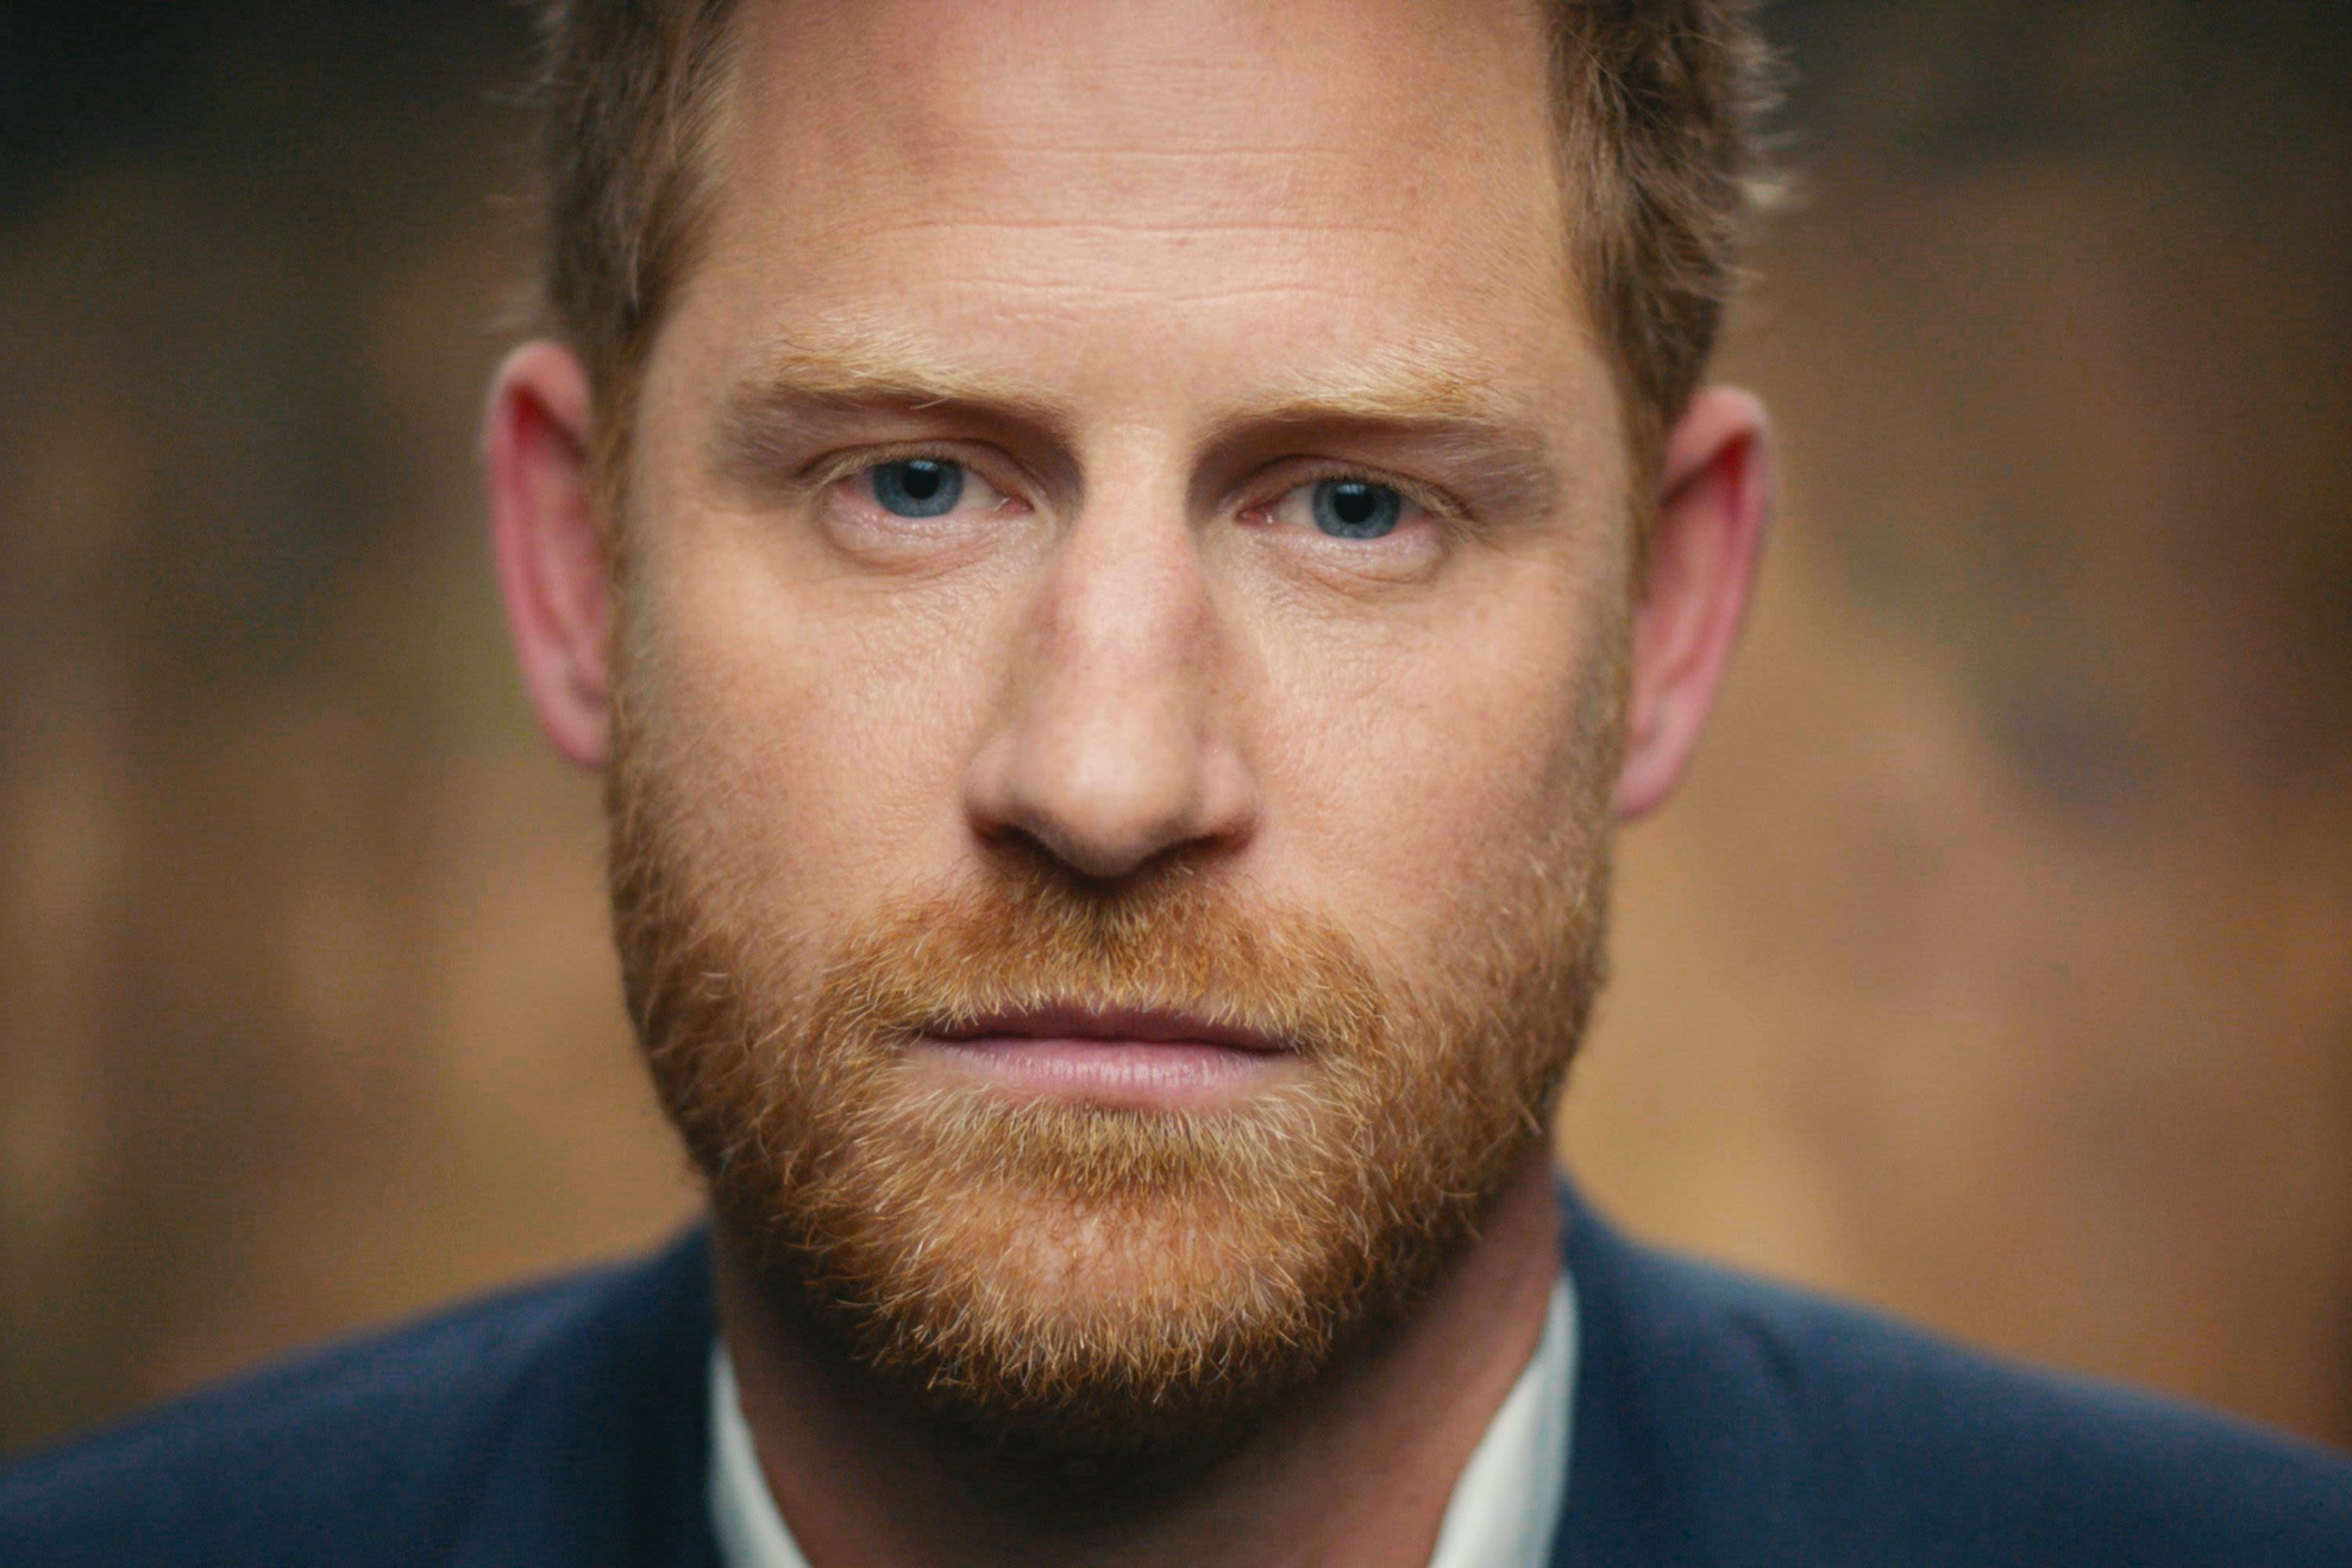 Prince Harry's new sit-down interview announced